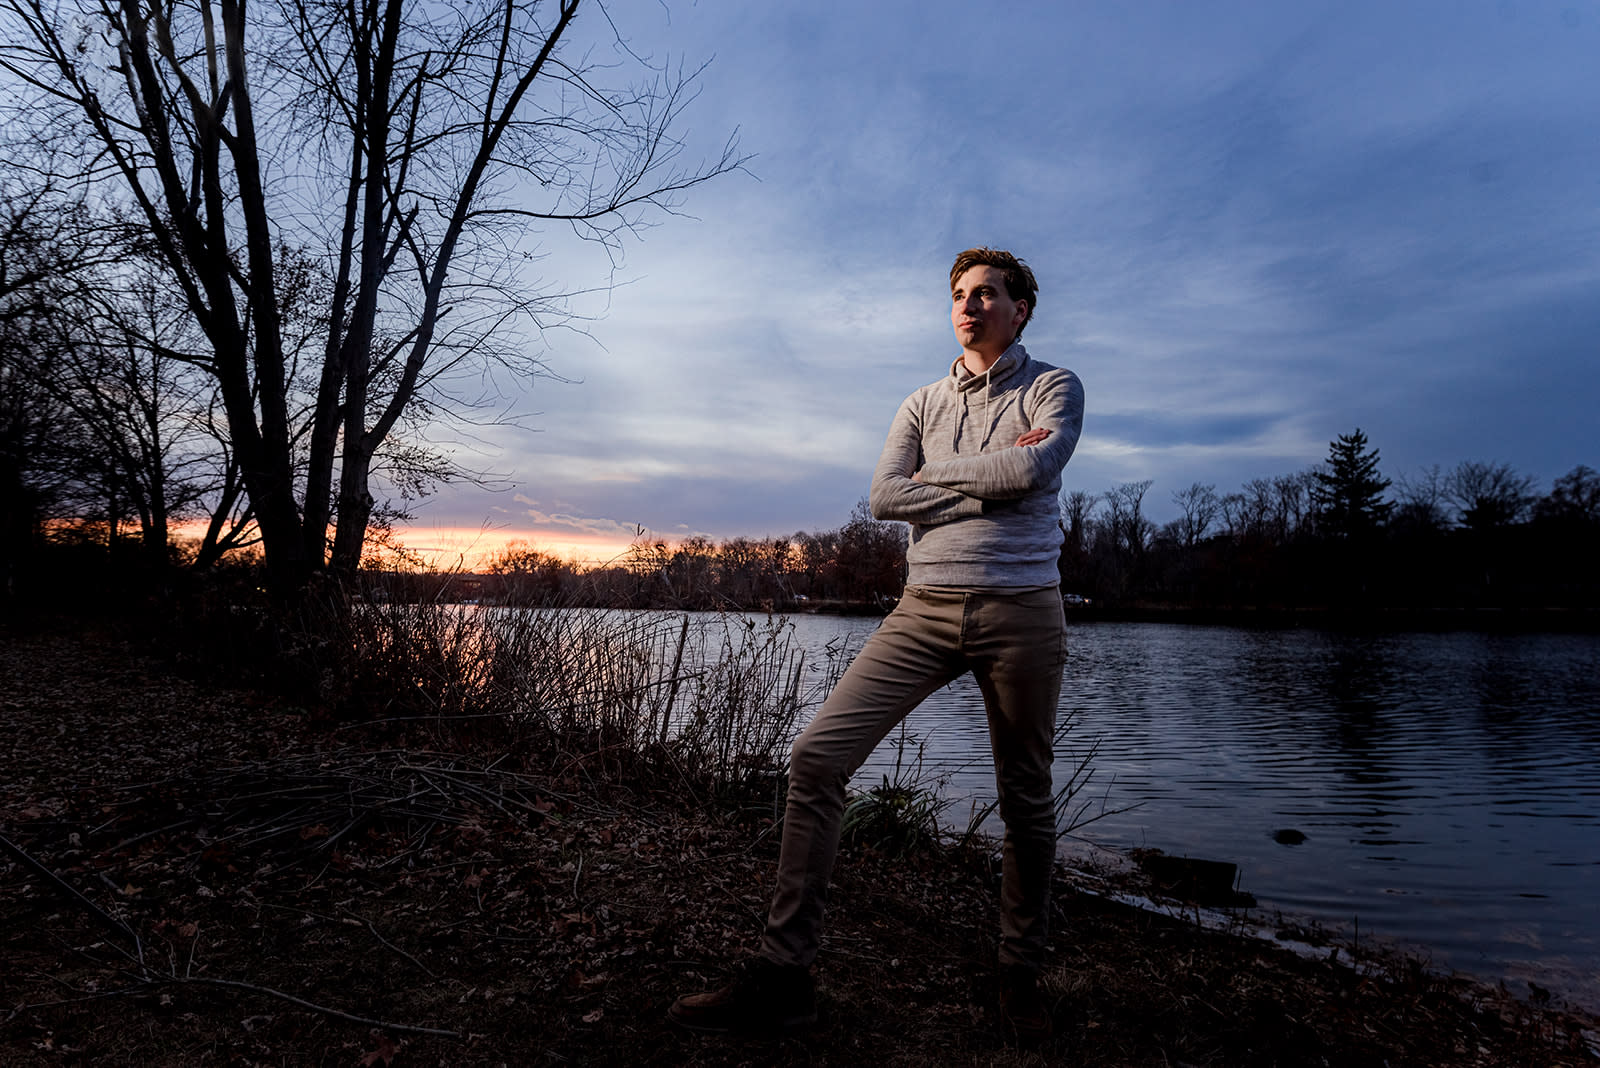 Author Jonathan standing in front of a lake while the sun sets behind him